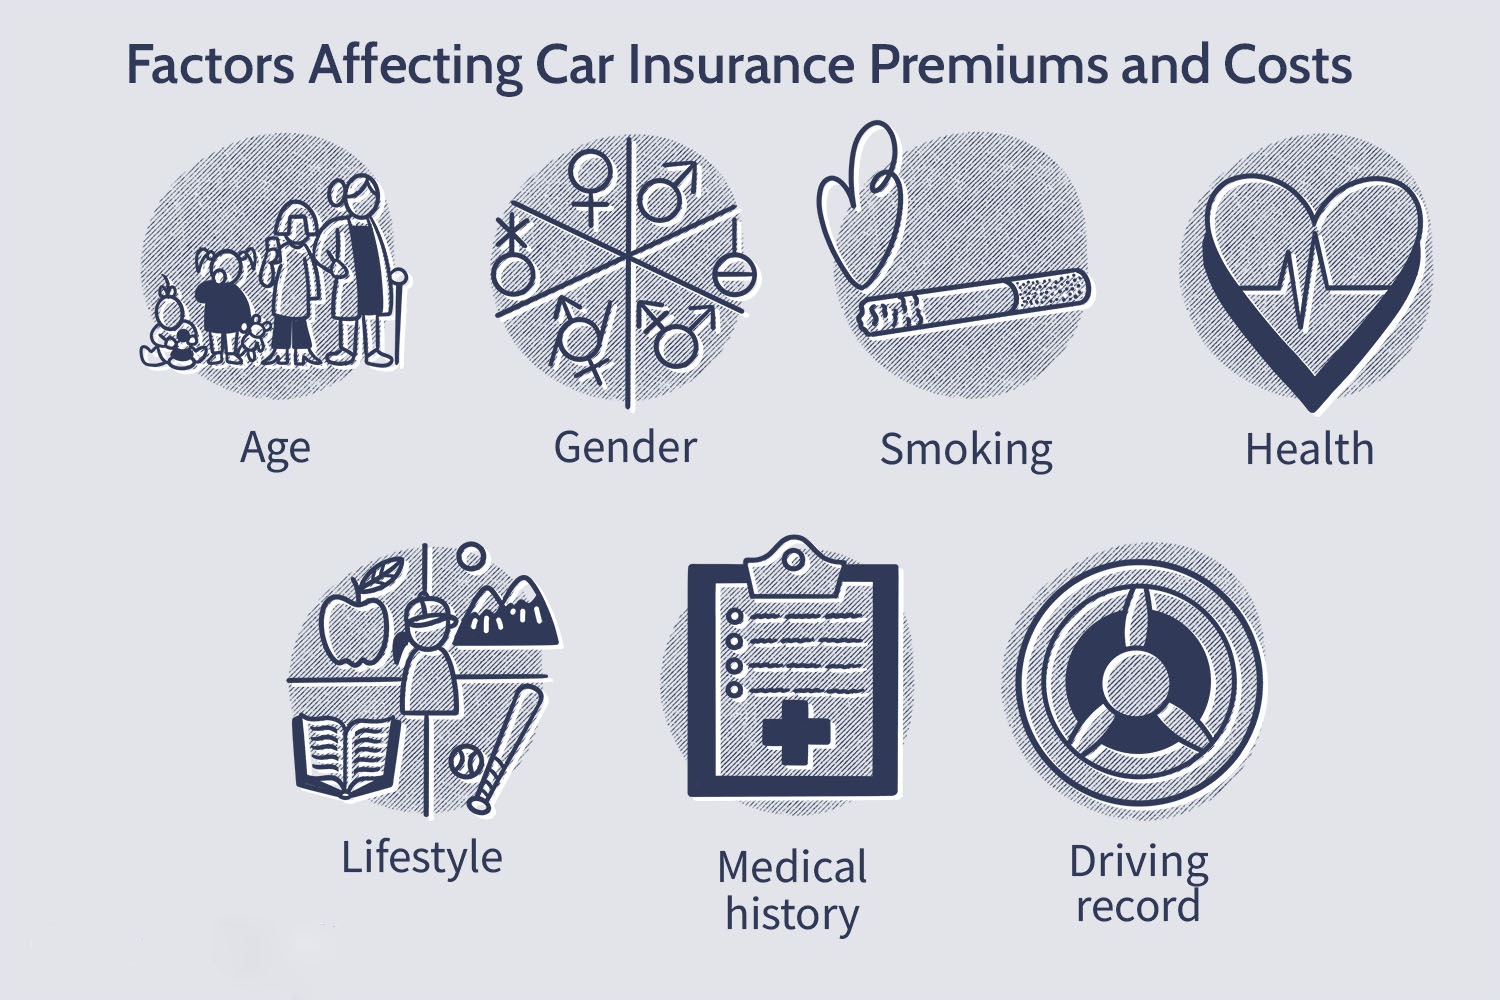 Which Behavioral Factor Would Influence The Premiums Of Auto Insurance